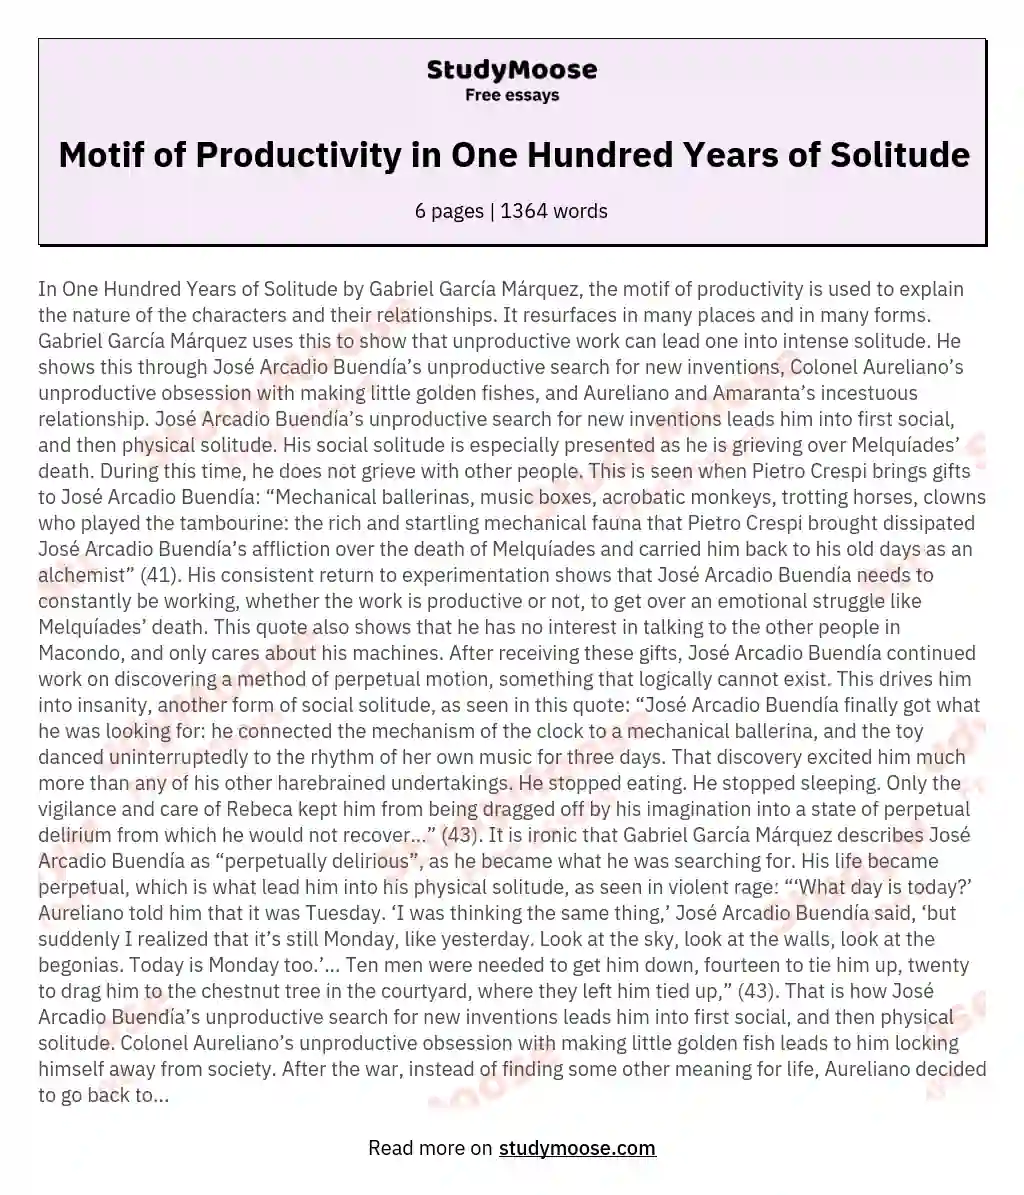 Motif of Productivity in One Hundred Years of Solitude essay